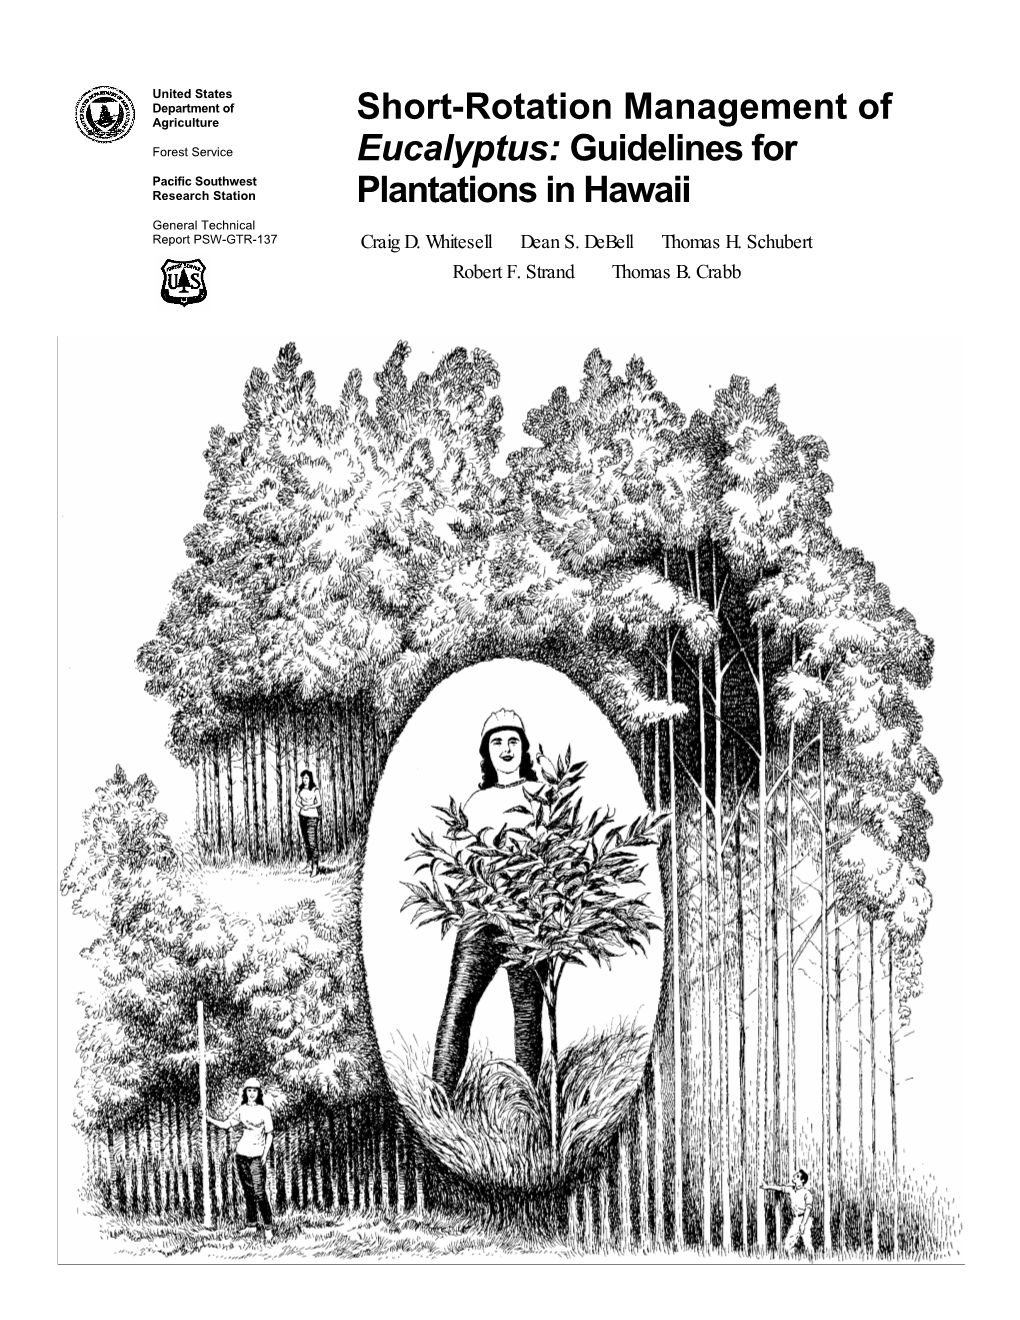 Short-Rotation Management of Eucalyptus: Guidelines for Plantations in Hawaii